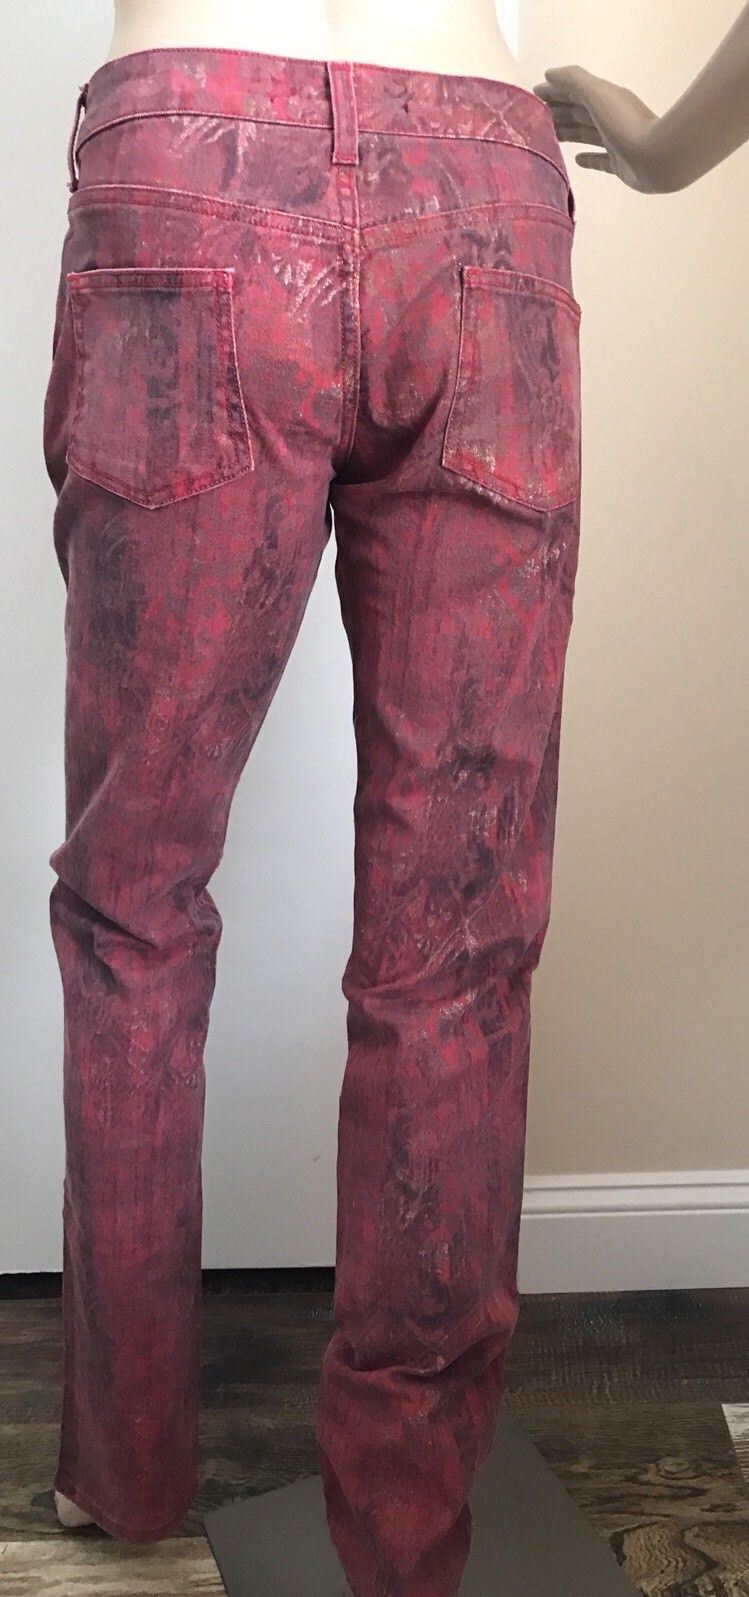 New $670 Just Cavalli Women's Pants Jeans Burgundy 43 ( 29 US ) Italy - BAYSUPERSTORE